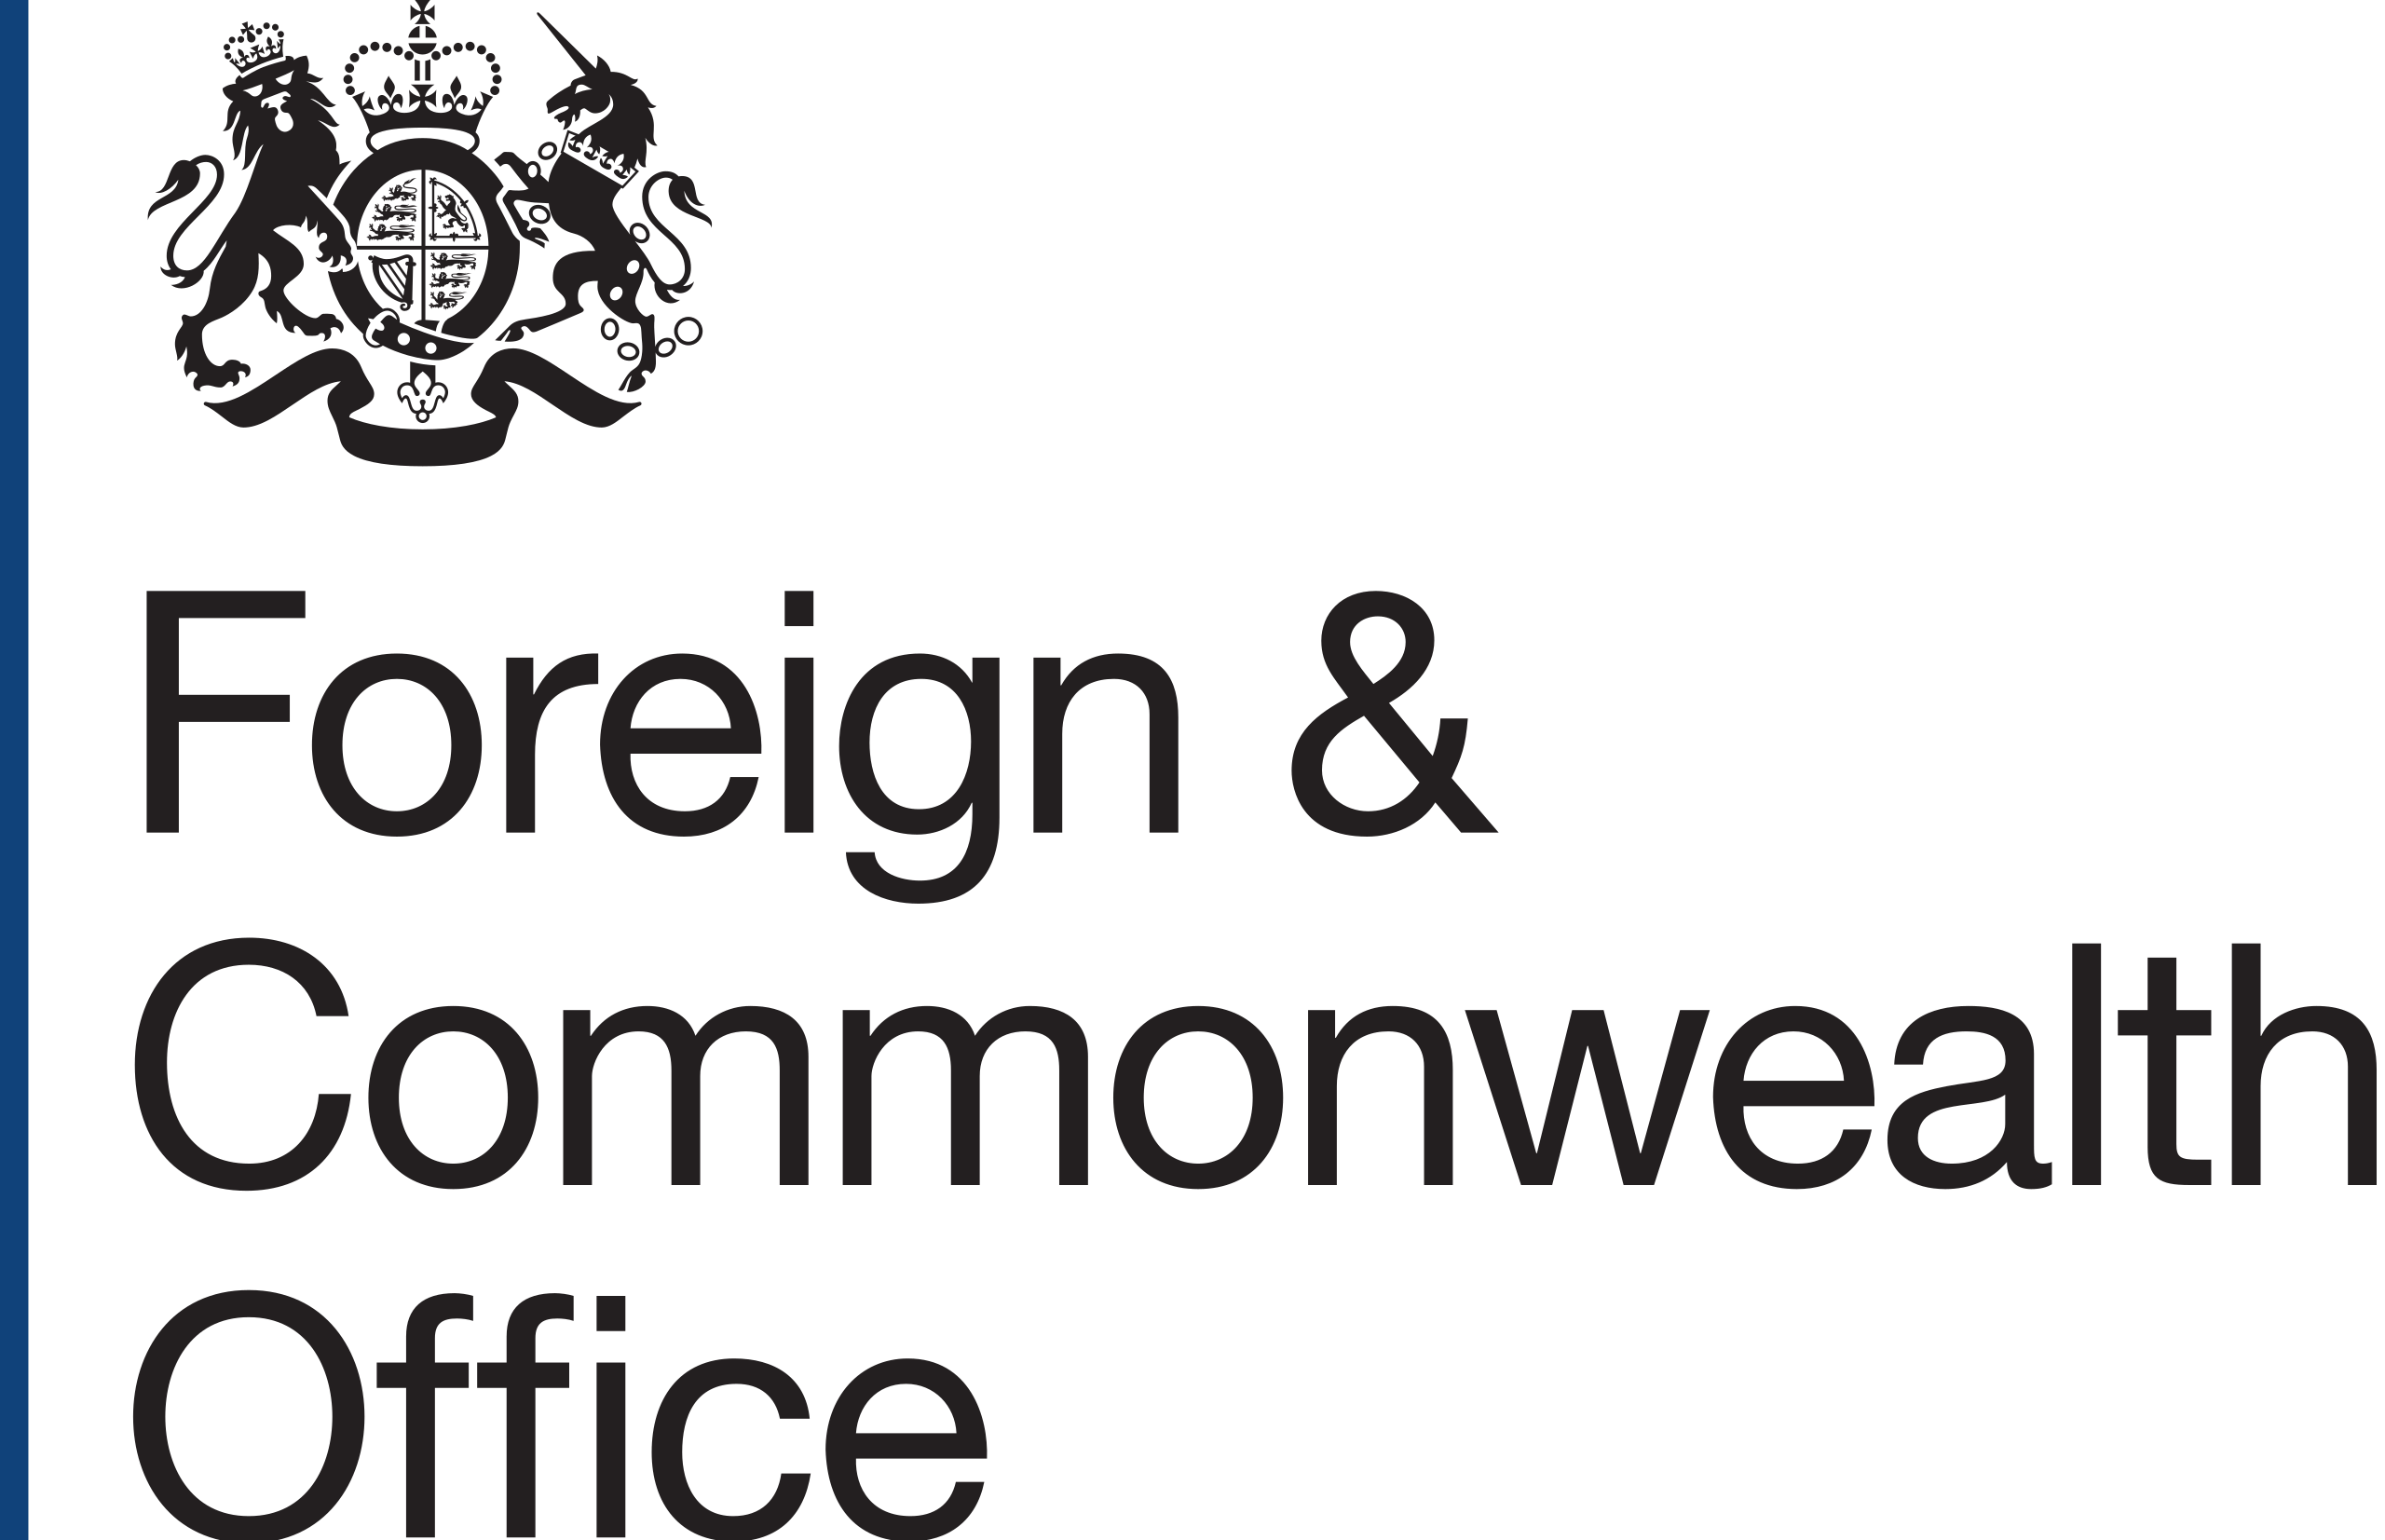 UK FCDO - United Kingdom Foreign, Commonwealth and Development Office